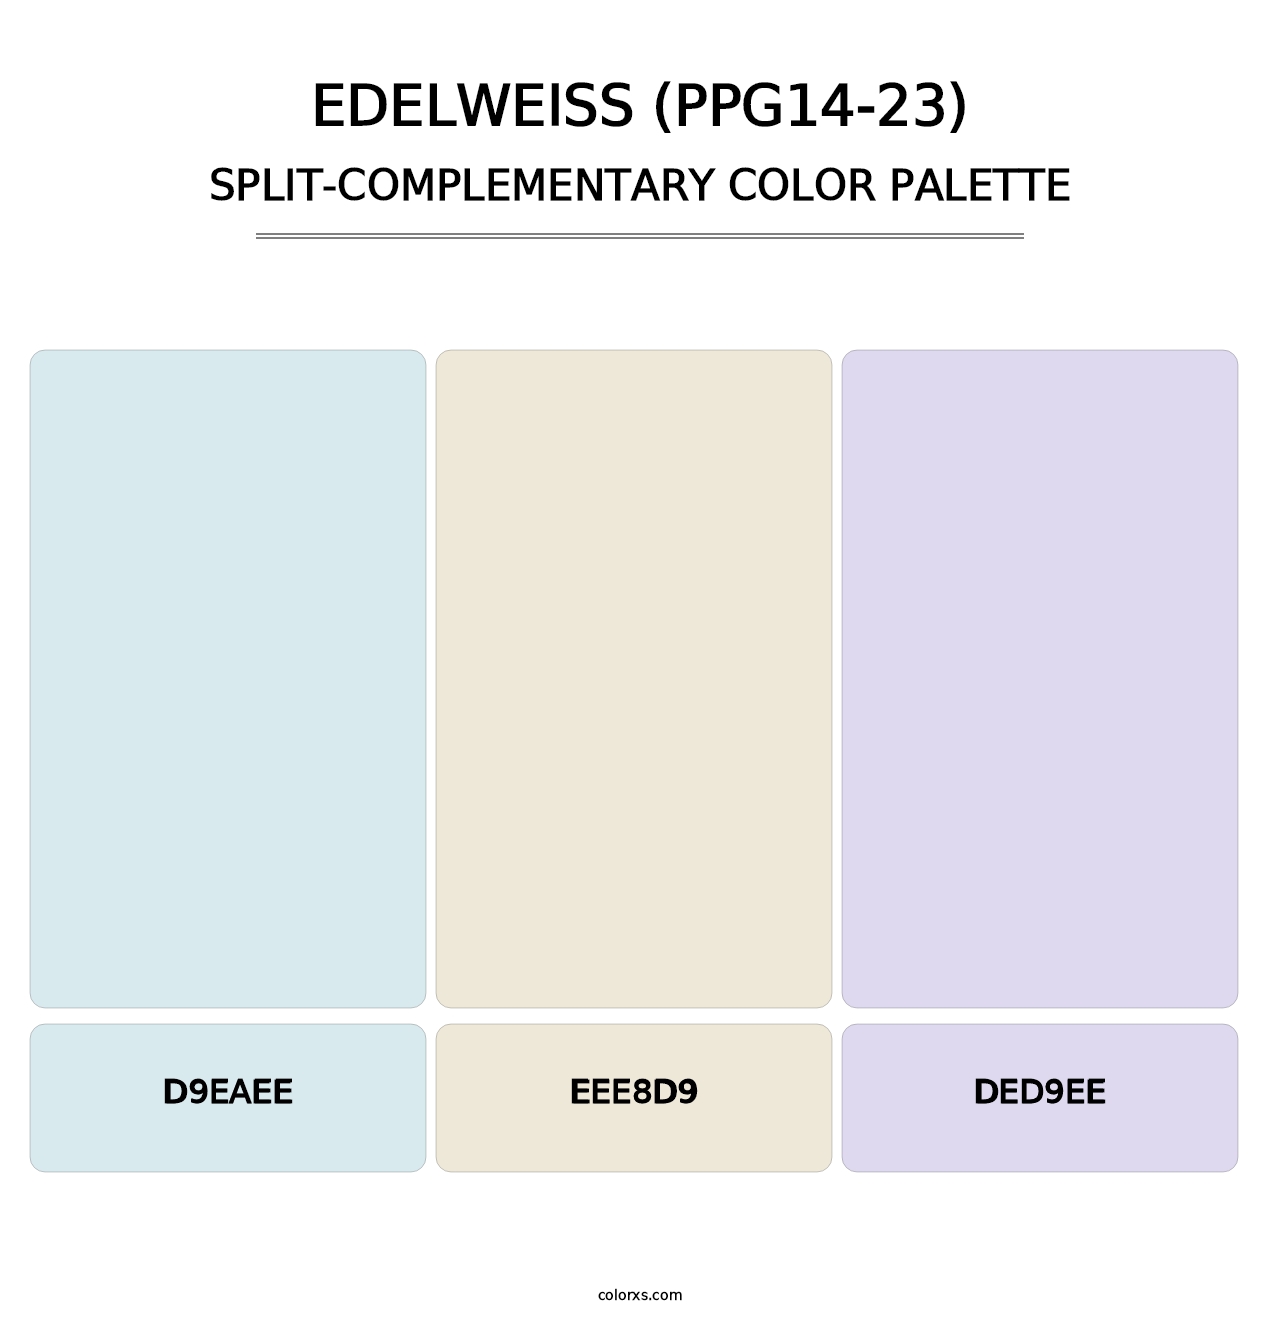 Edelweiss (PPG14-23) - Split-Complementary Color Palette